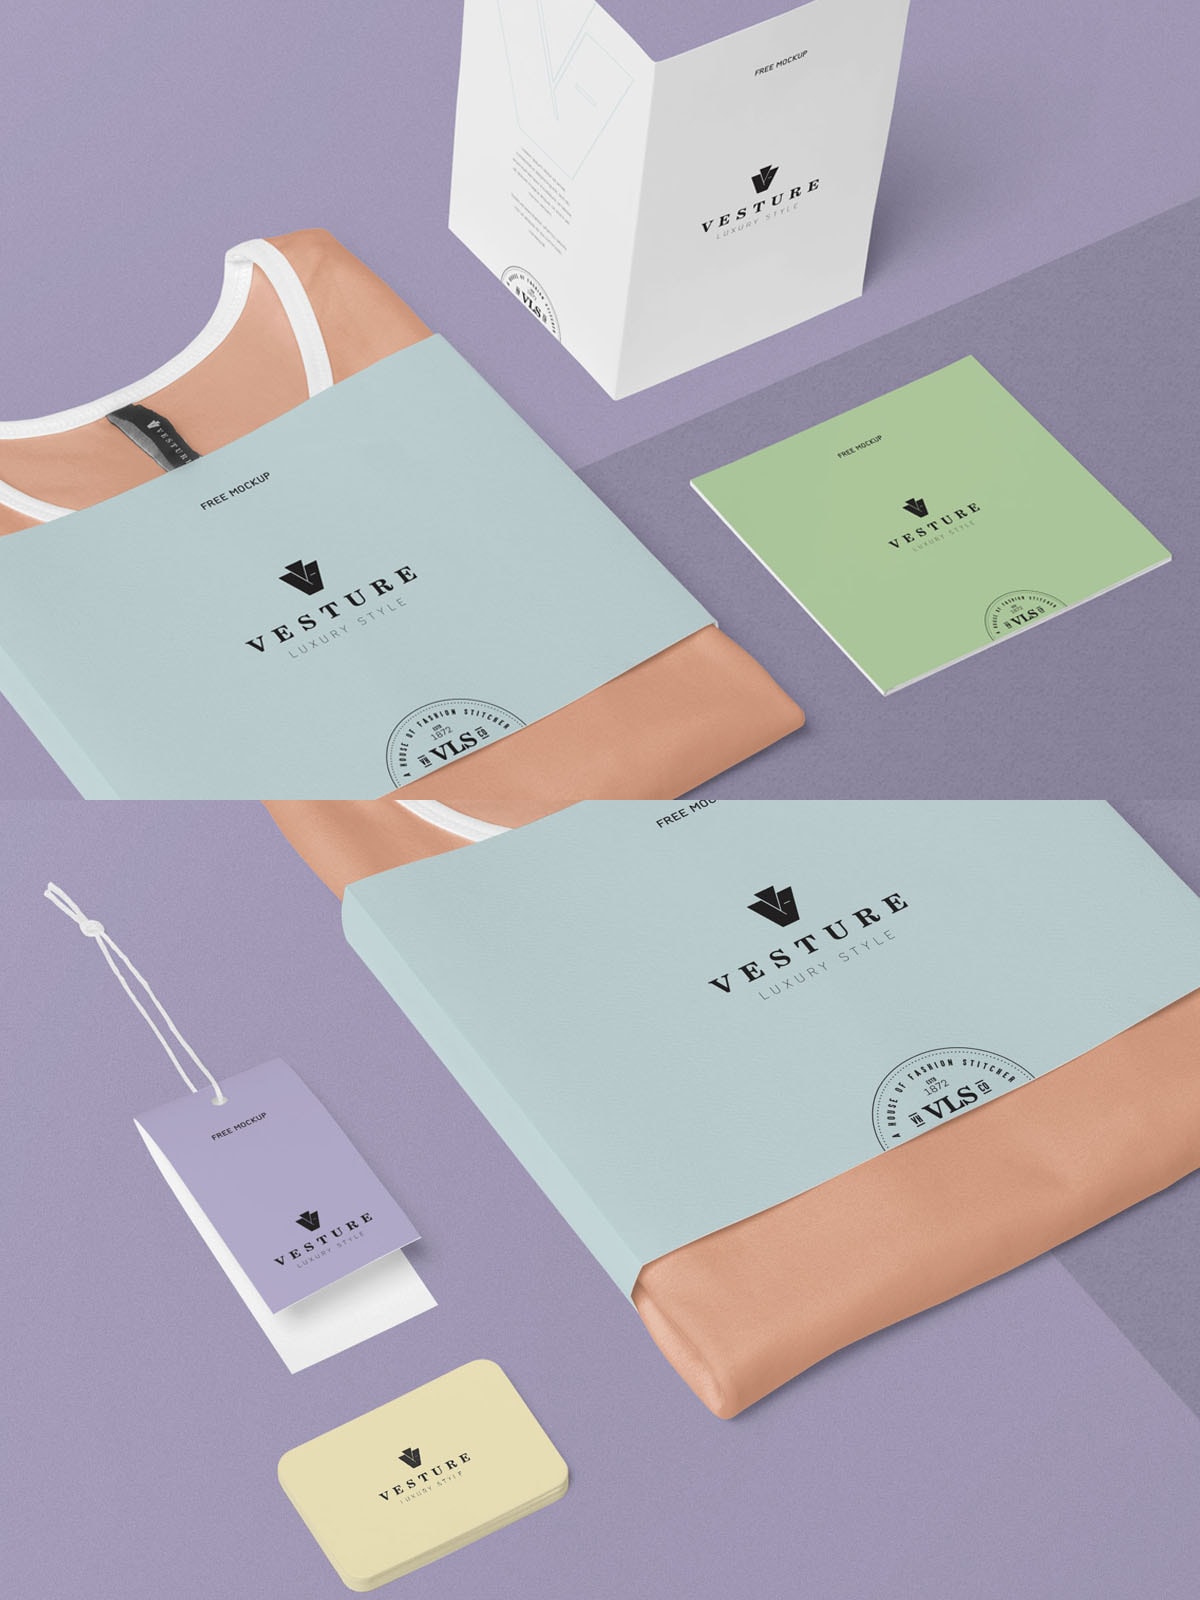 Download Free Fashion Branding Mockup Psd - Find the Perfect ...